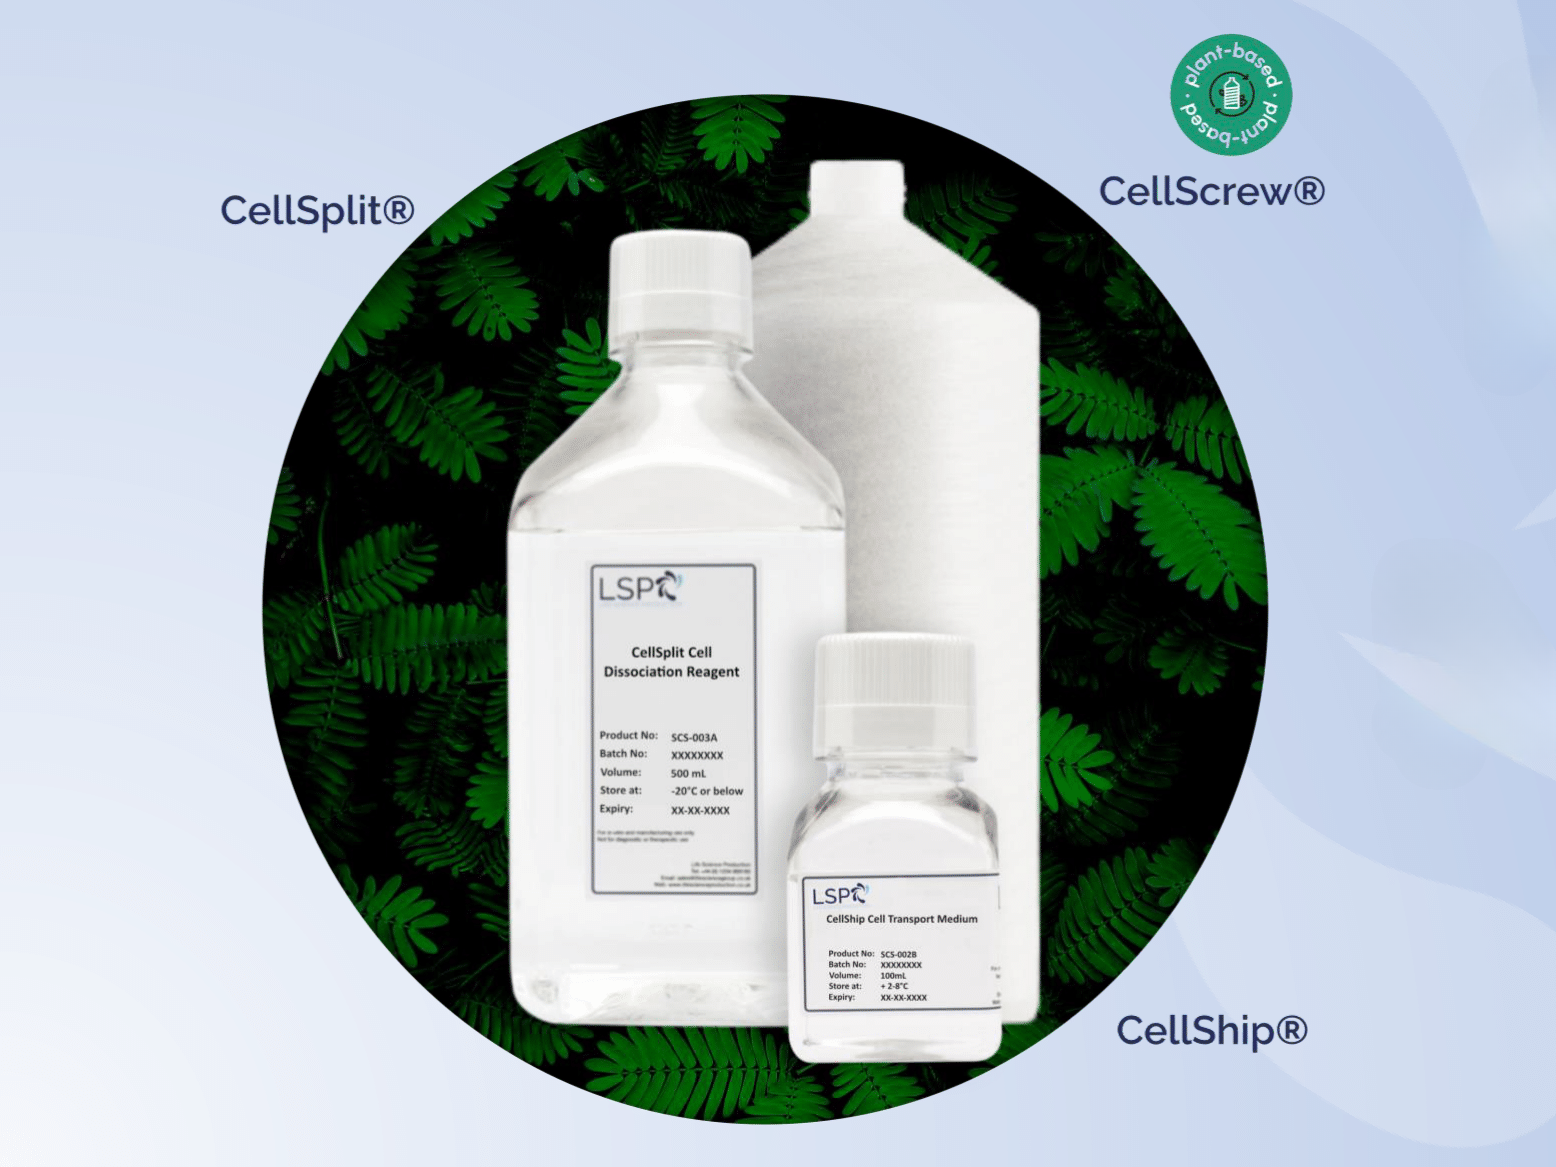 Xeno-Free Products Including CellSplit, CellShip and CellScrew